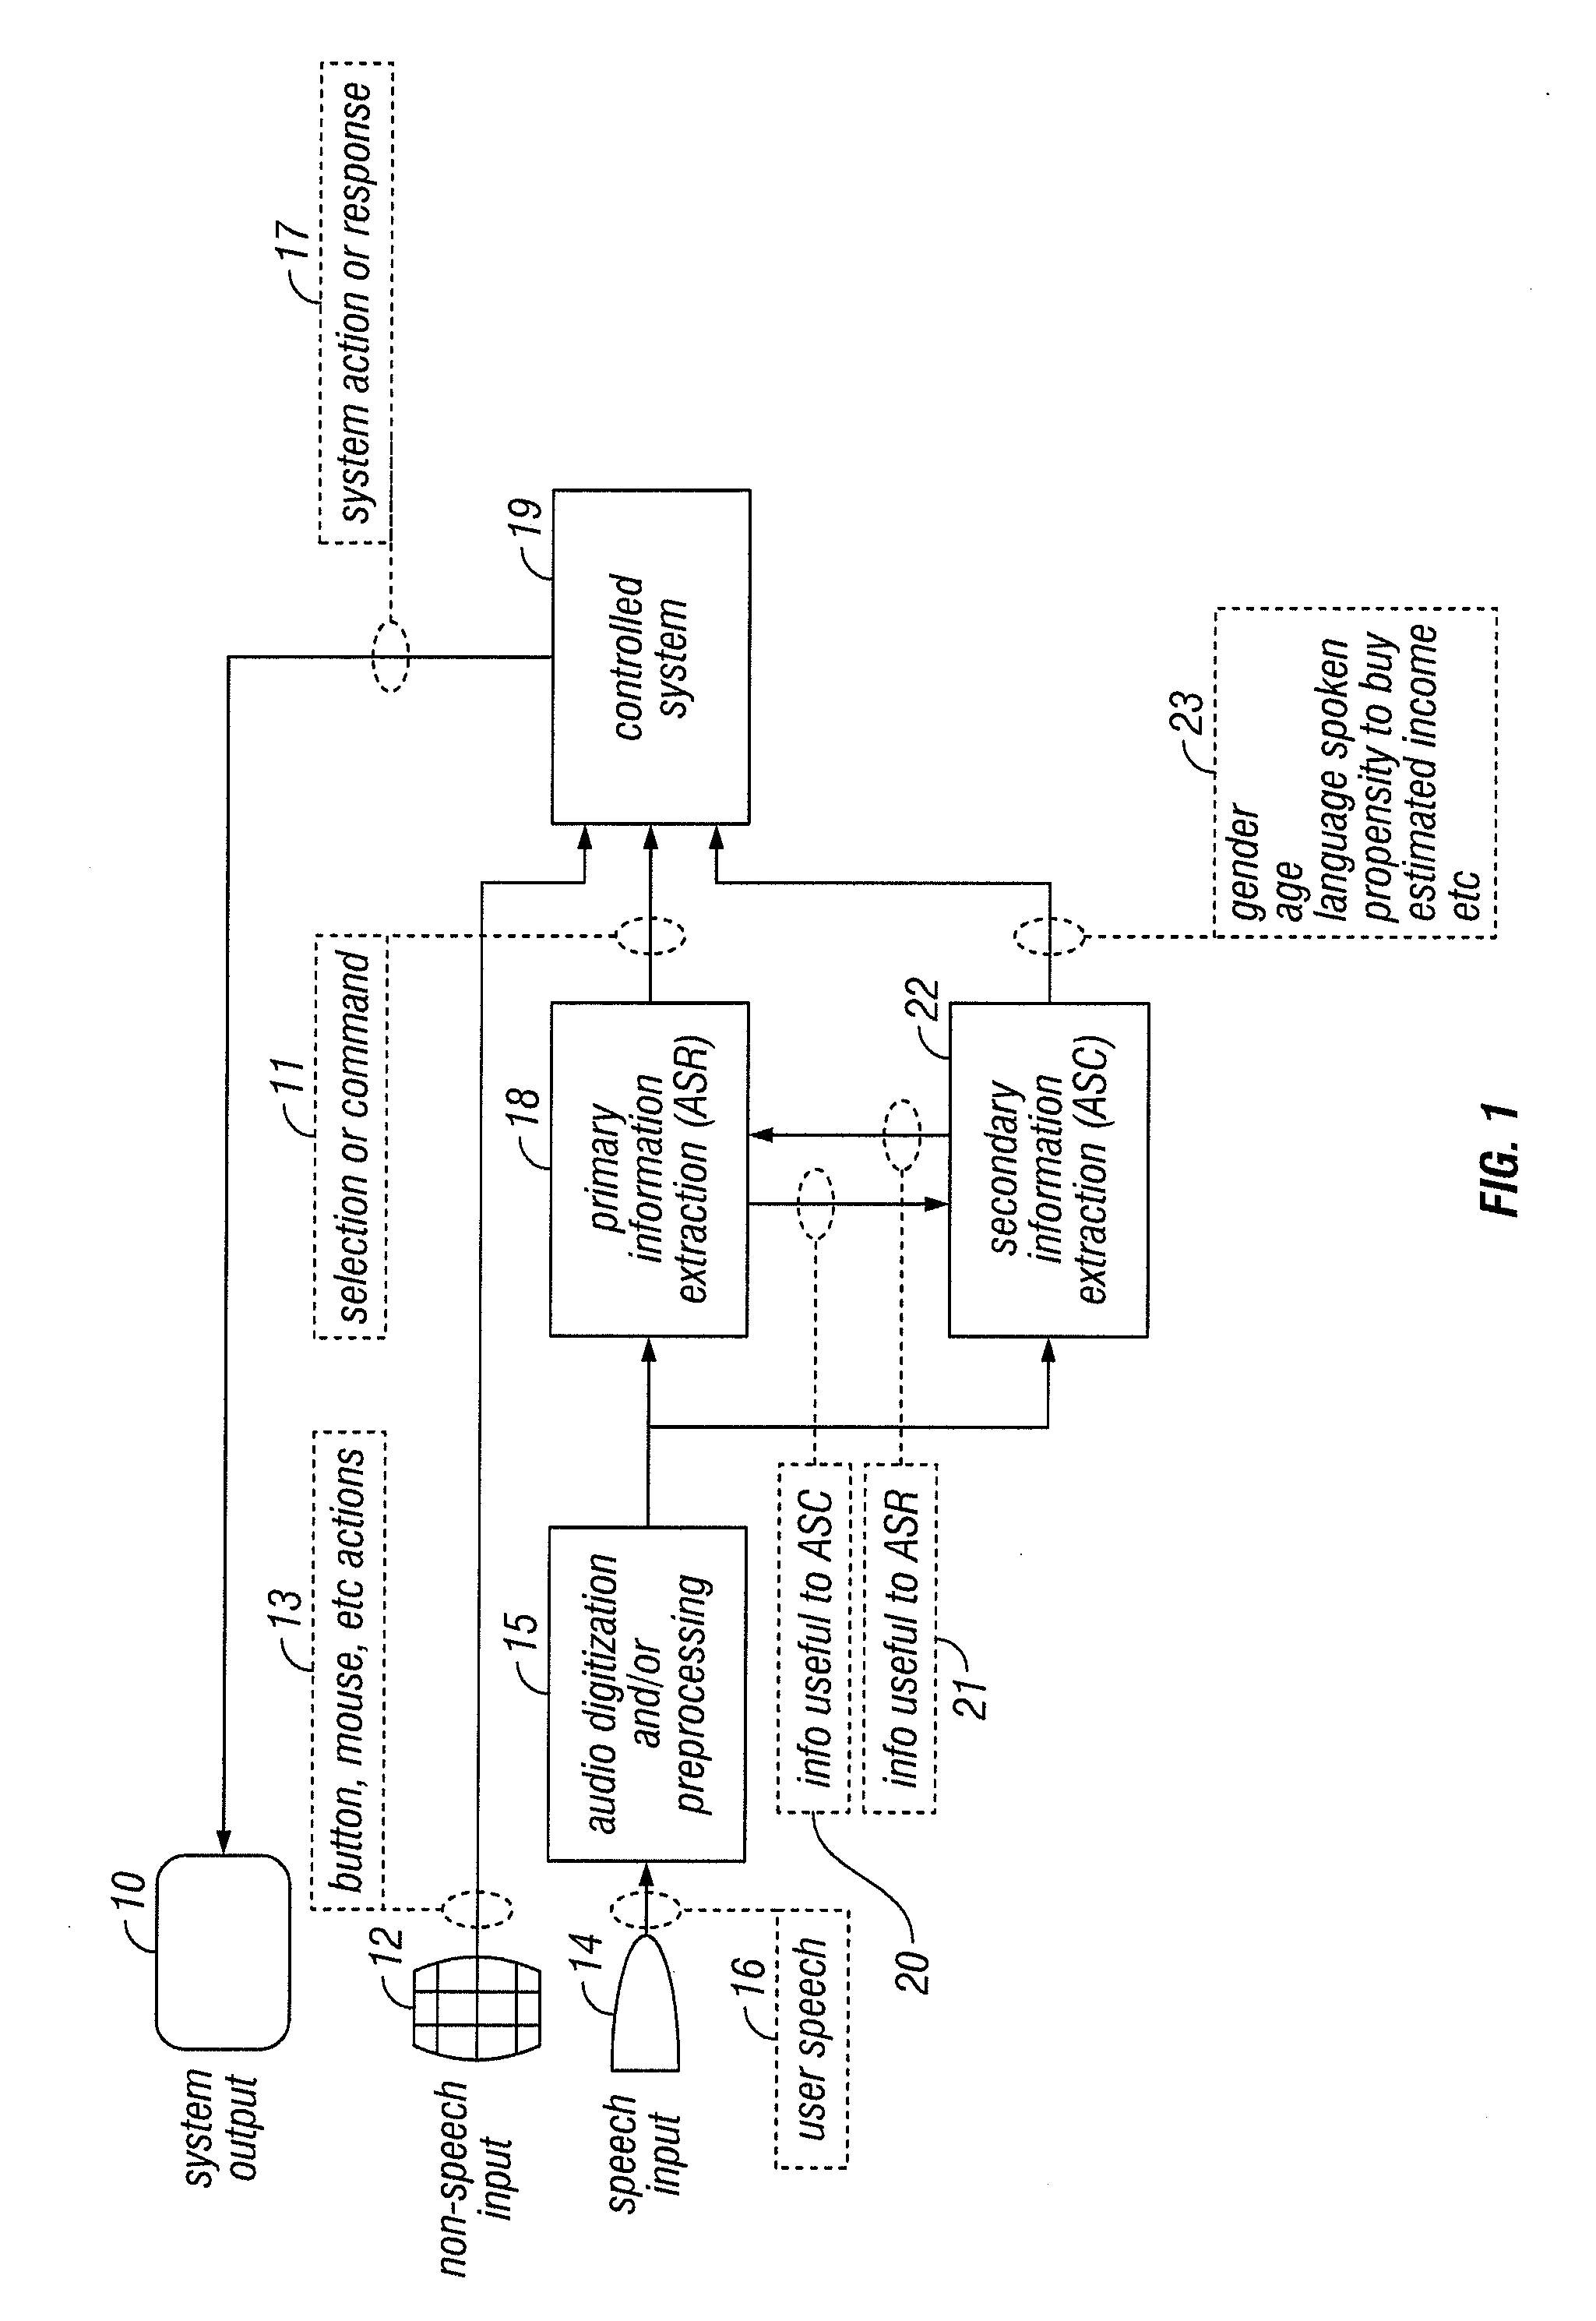 Method and Apparatus for Automatically Determining Speaker Characteristics for Speech-Directed Advertising or Other Enhancement of Speech-Controlled Devices or Services